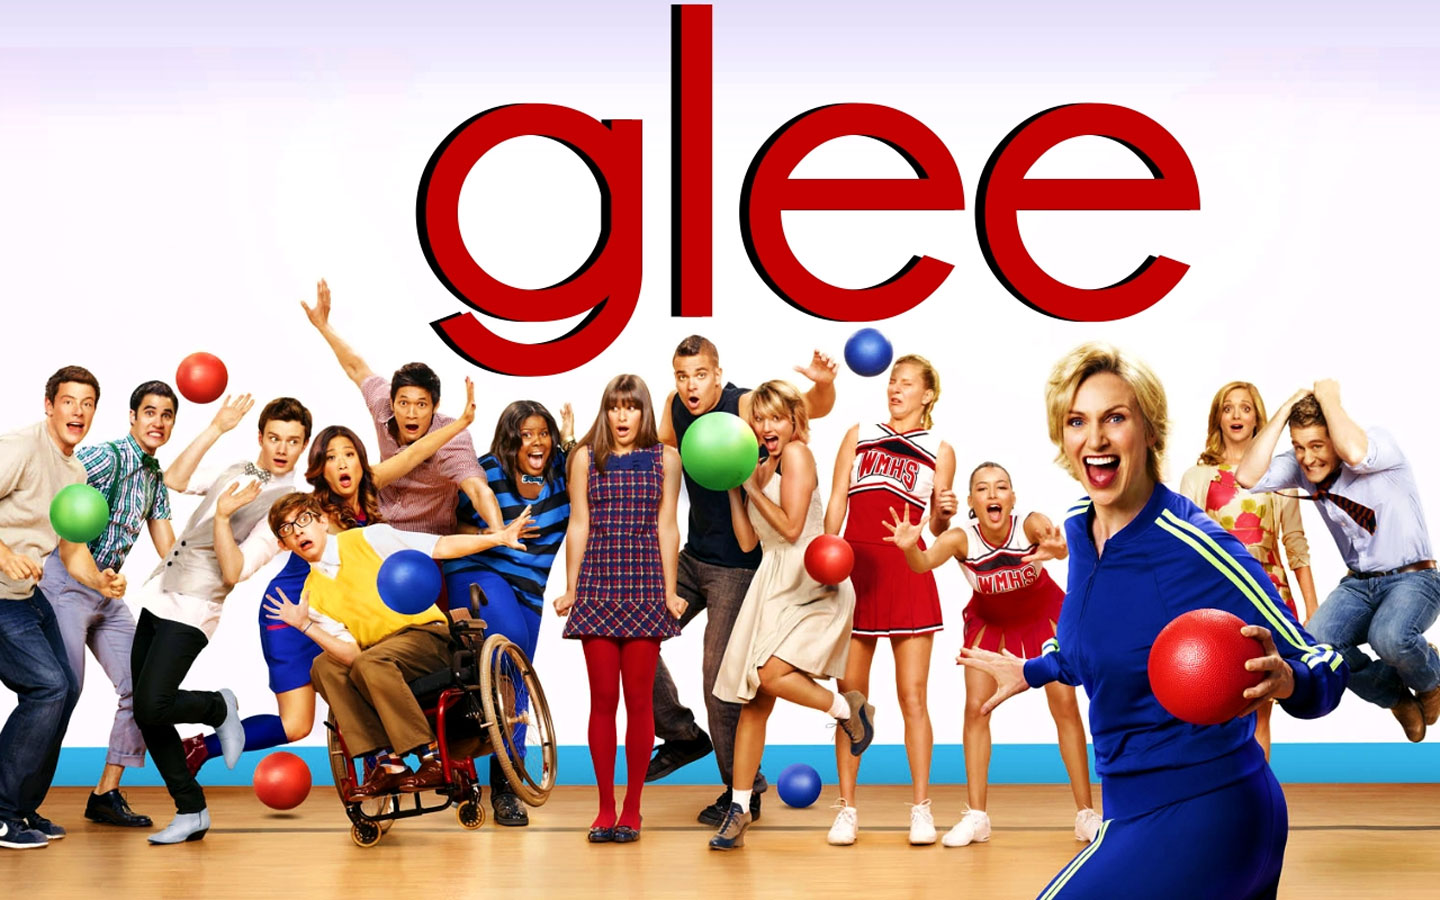 Free Download Glee Wallpaper And Background Image 1440x900 Id 1440x900 For Your Desktop Mobile Tablet Explore 57 Glee Wallpaper Glee Wallpaper For Phone Glee Wallpaper For Ipad Glee Cast Wallpaper